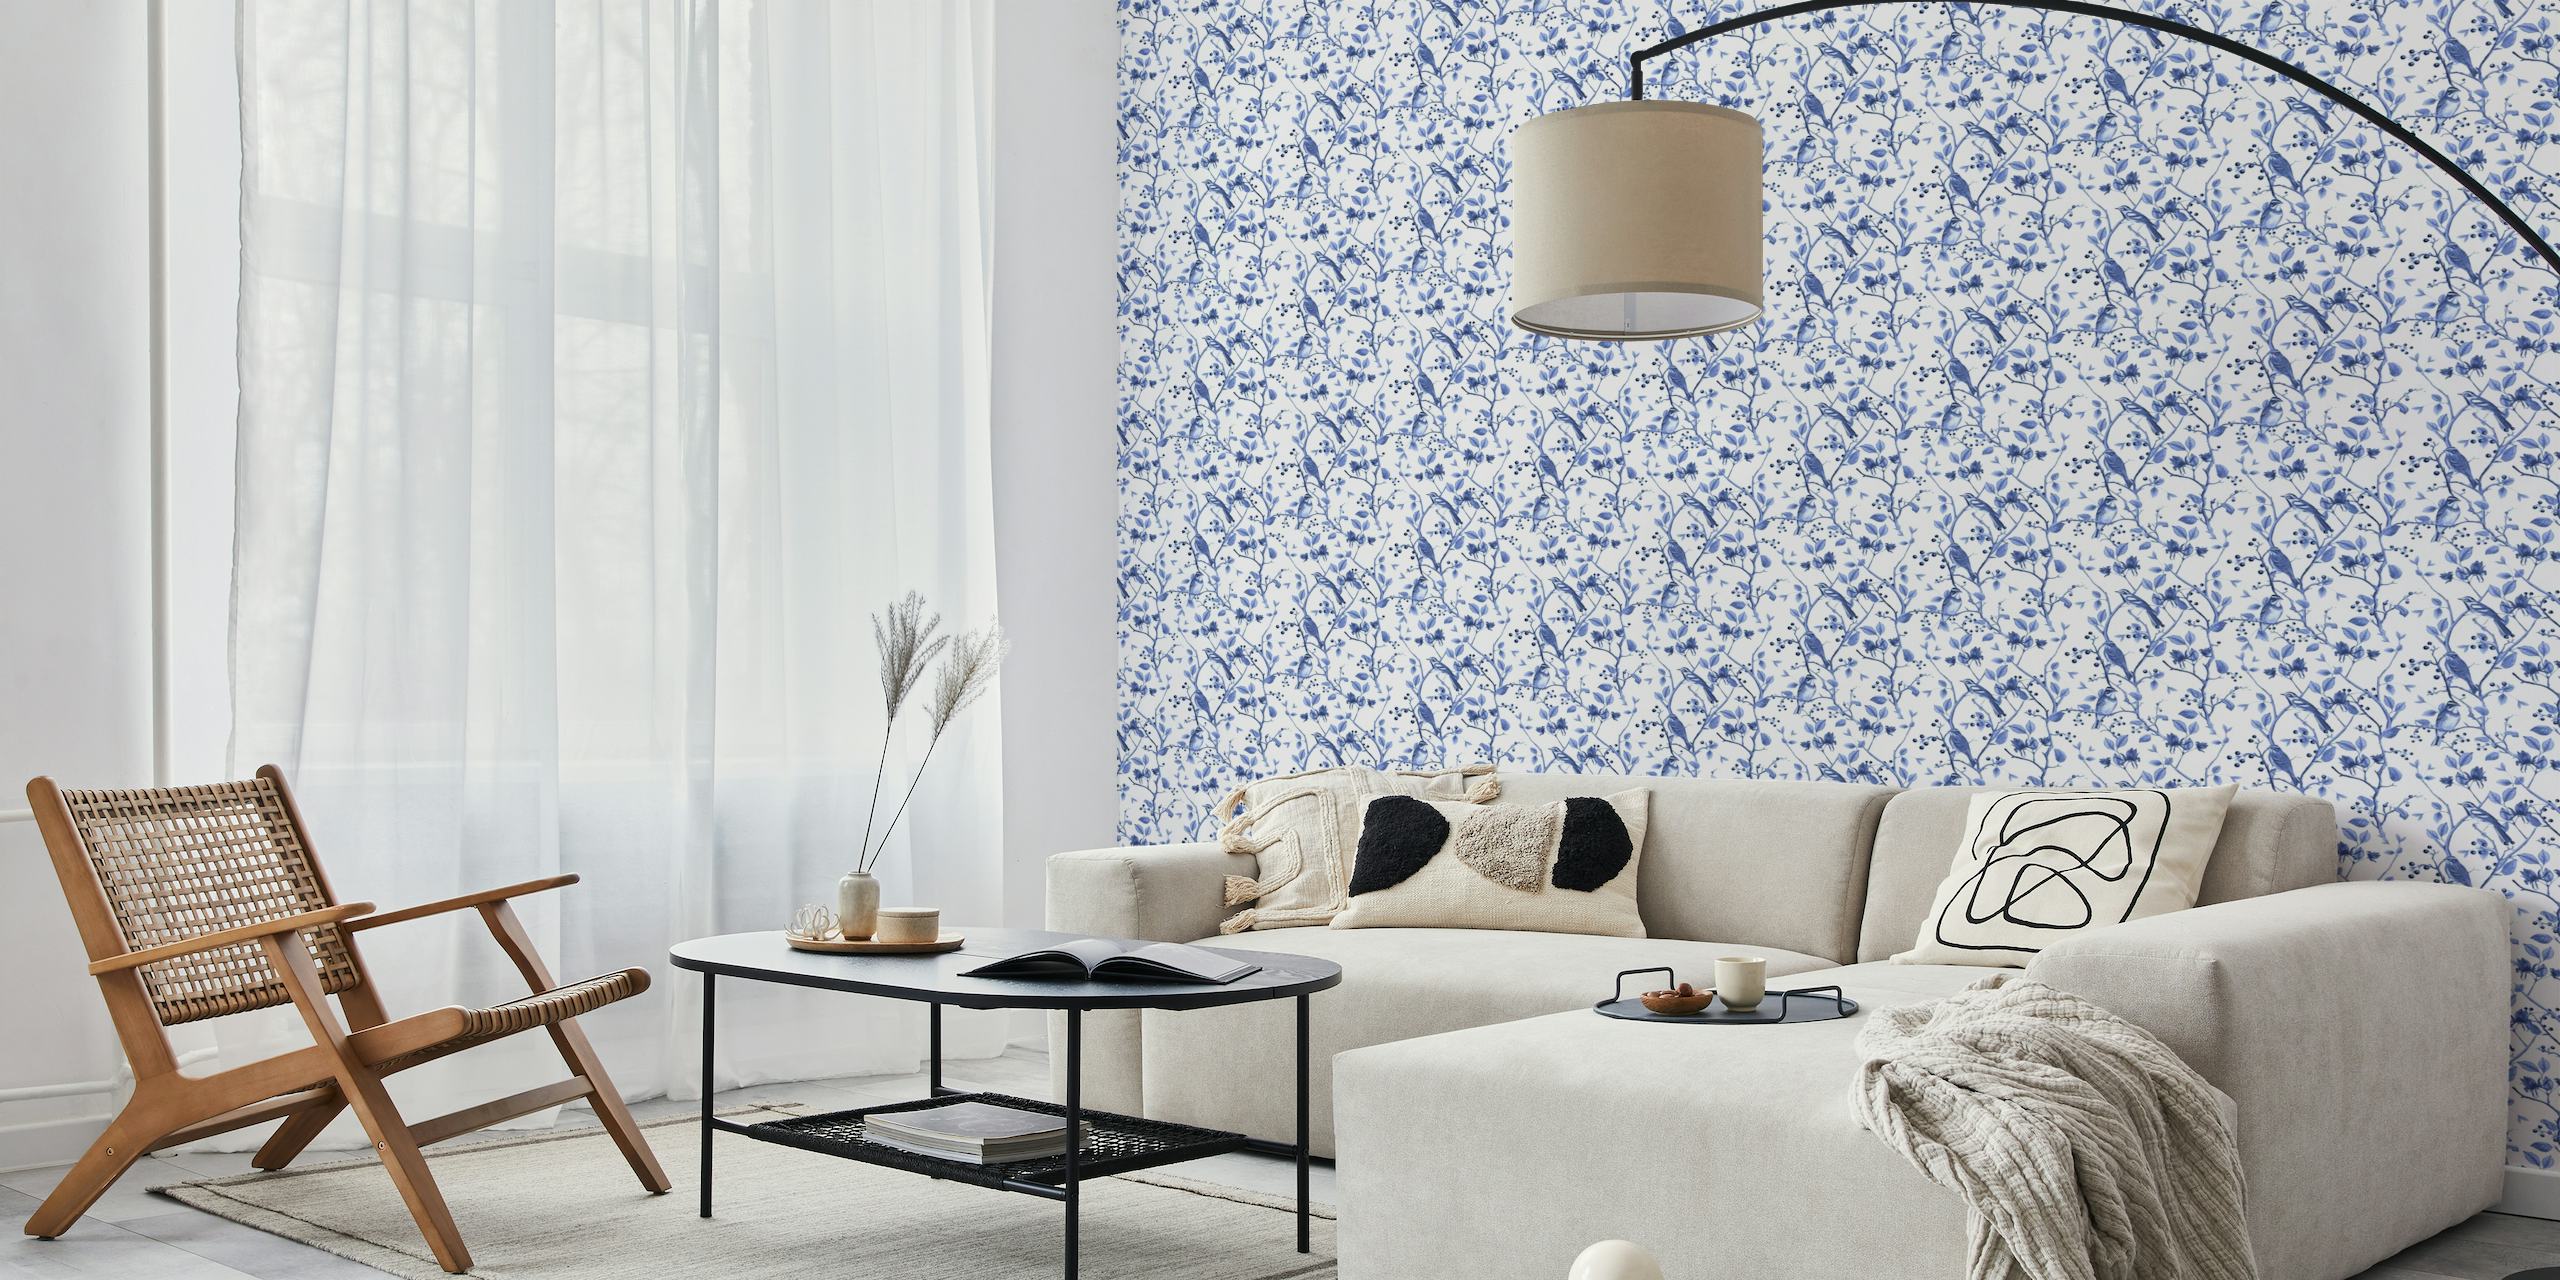 Nordic Chinoiserie wallpaper with blue birds and foliage on a white background